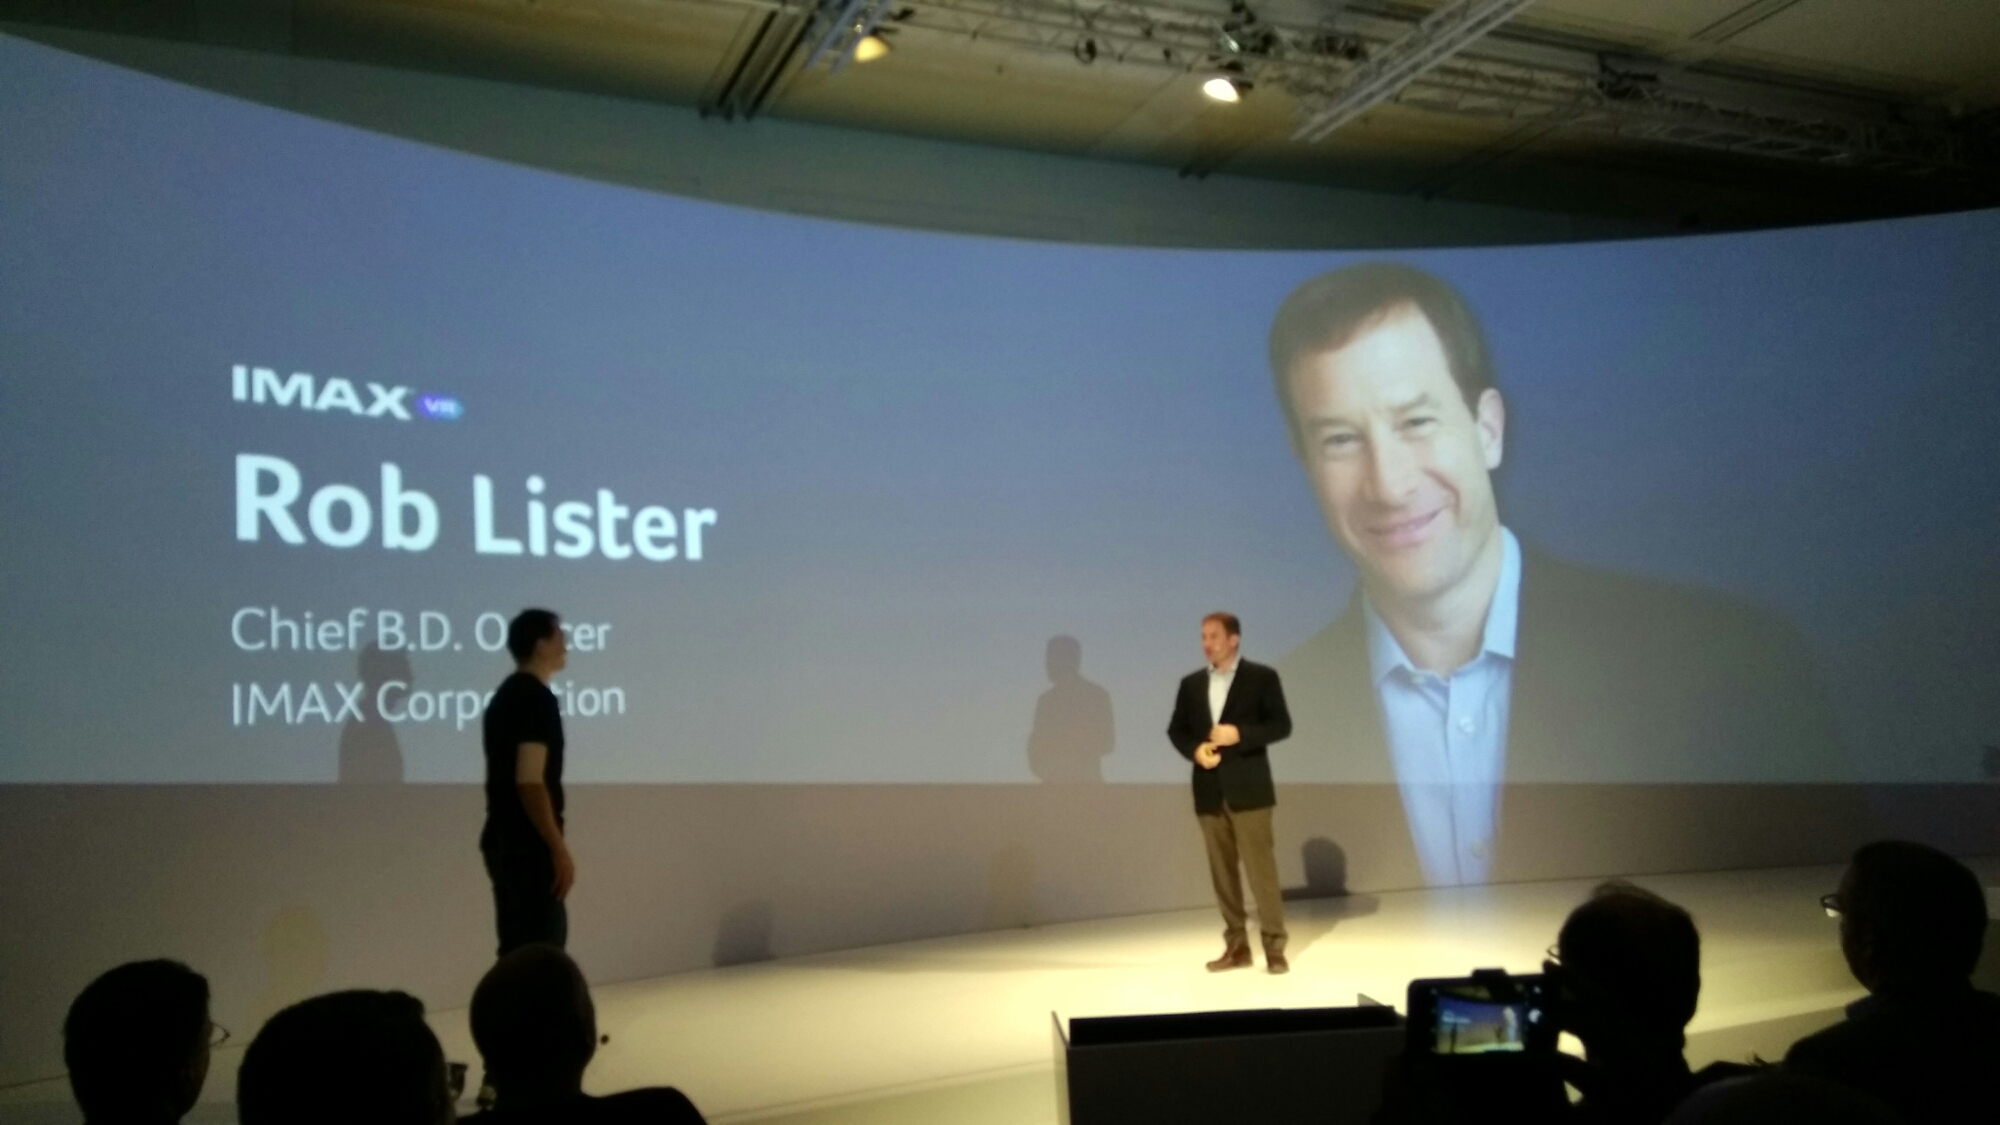 IFA Berlin 2016   Acer Press Conference